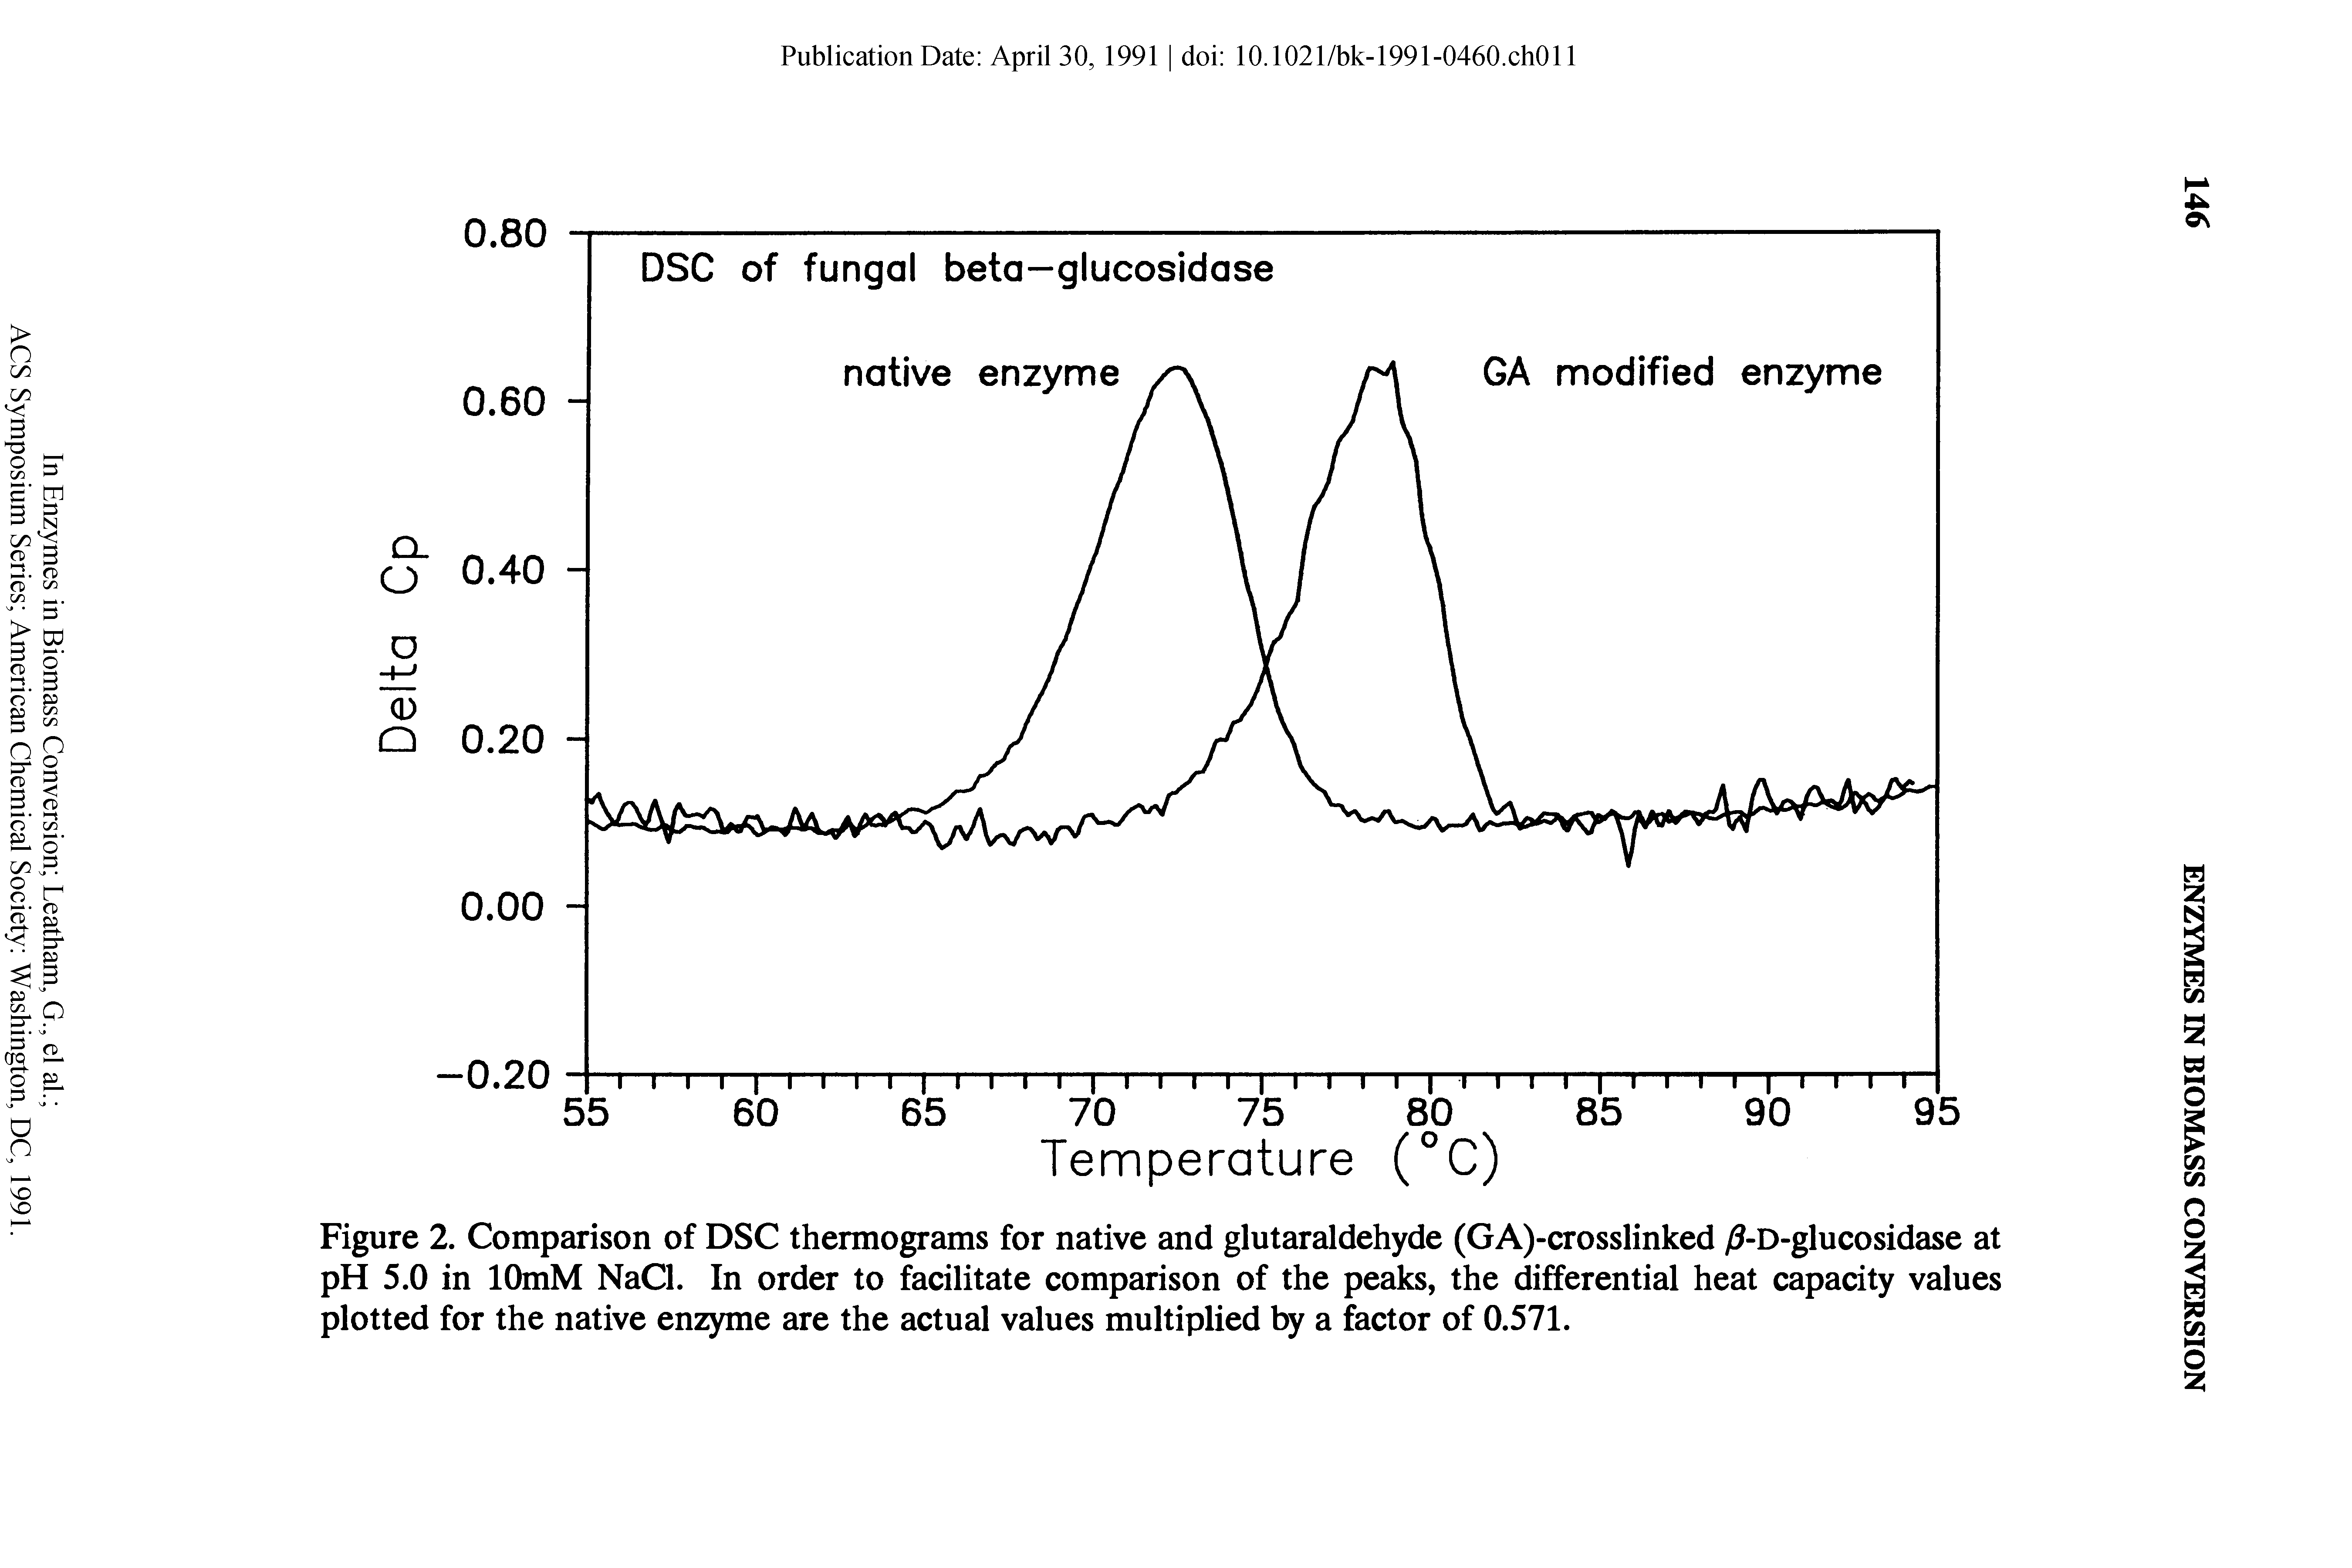 Figure 2. Comparison of DSC thermograms for native and glutaraldehyde (GA)-crosslinked / -D-glucosidase at pH 5.0 in lOmM NaCl. In order to facilitate comparison of the peaks, the differential heat capacity values plotted for the native enzyme are the actual values multiplied by a fector of 0.571.